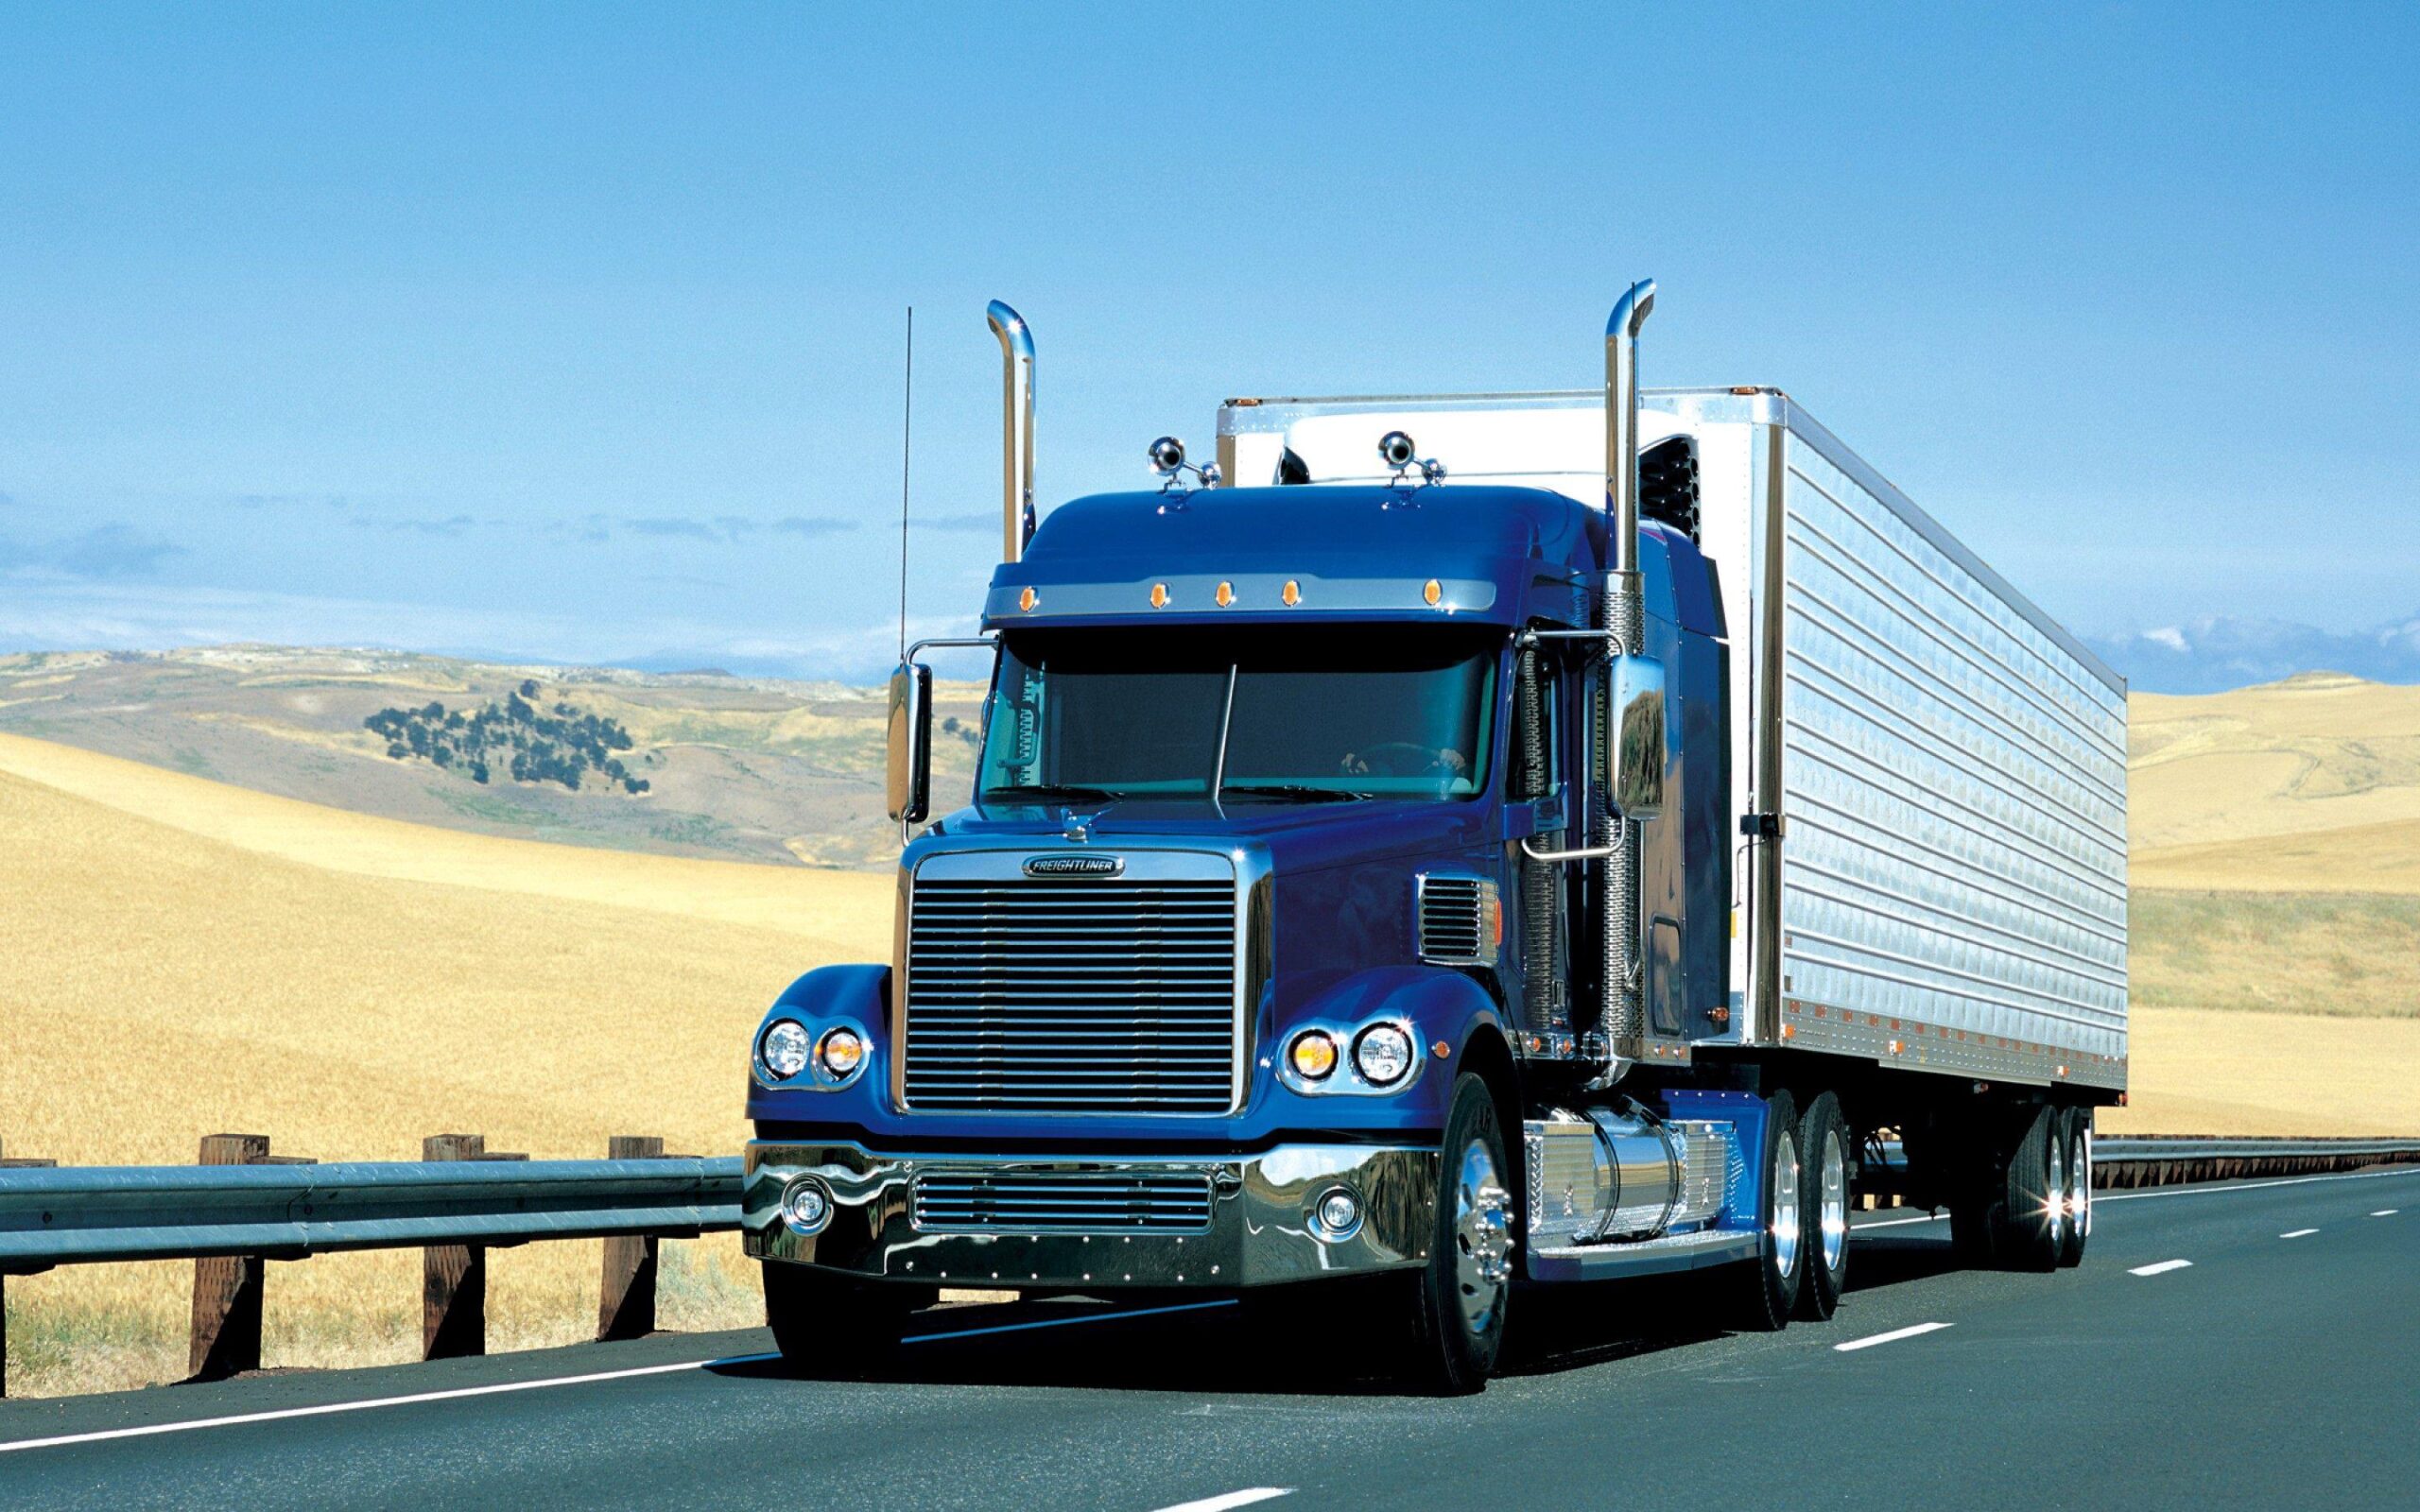 Affordable Truck and Trailer Finance and Lease Solutions